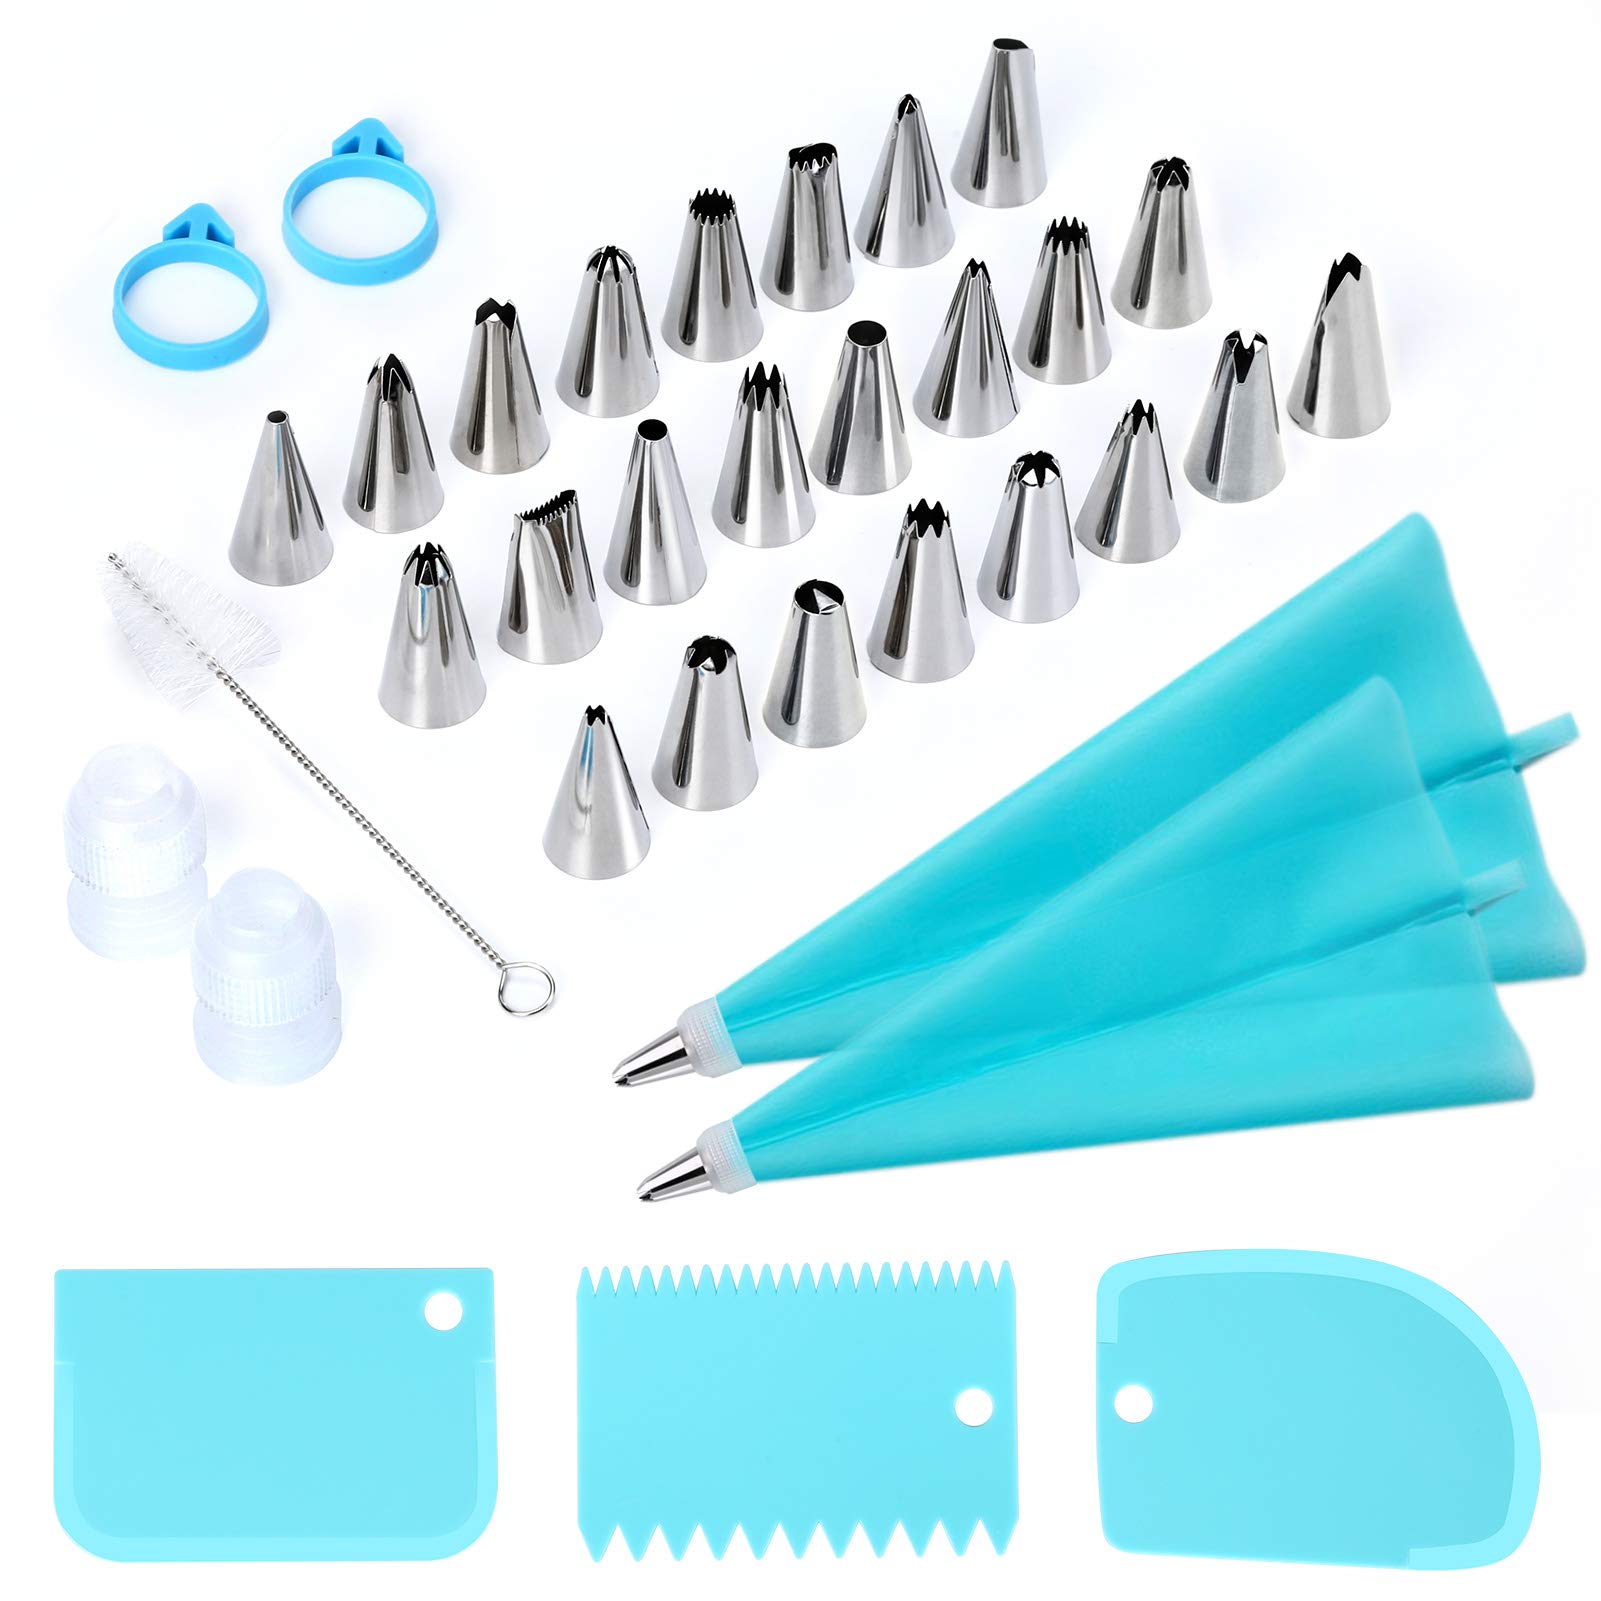 kaverme 34Pcs Piping Bags and Tips Set, Bake cake Decorating Kit with 24 Stainless Steel Tips, 2 Reusable Silicone Pastry Bags, 3 Icing